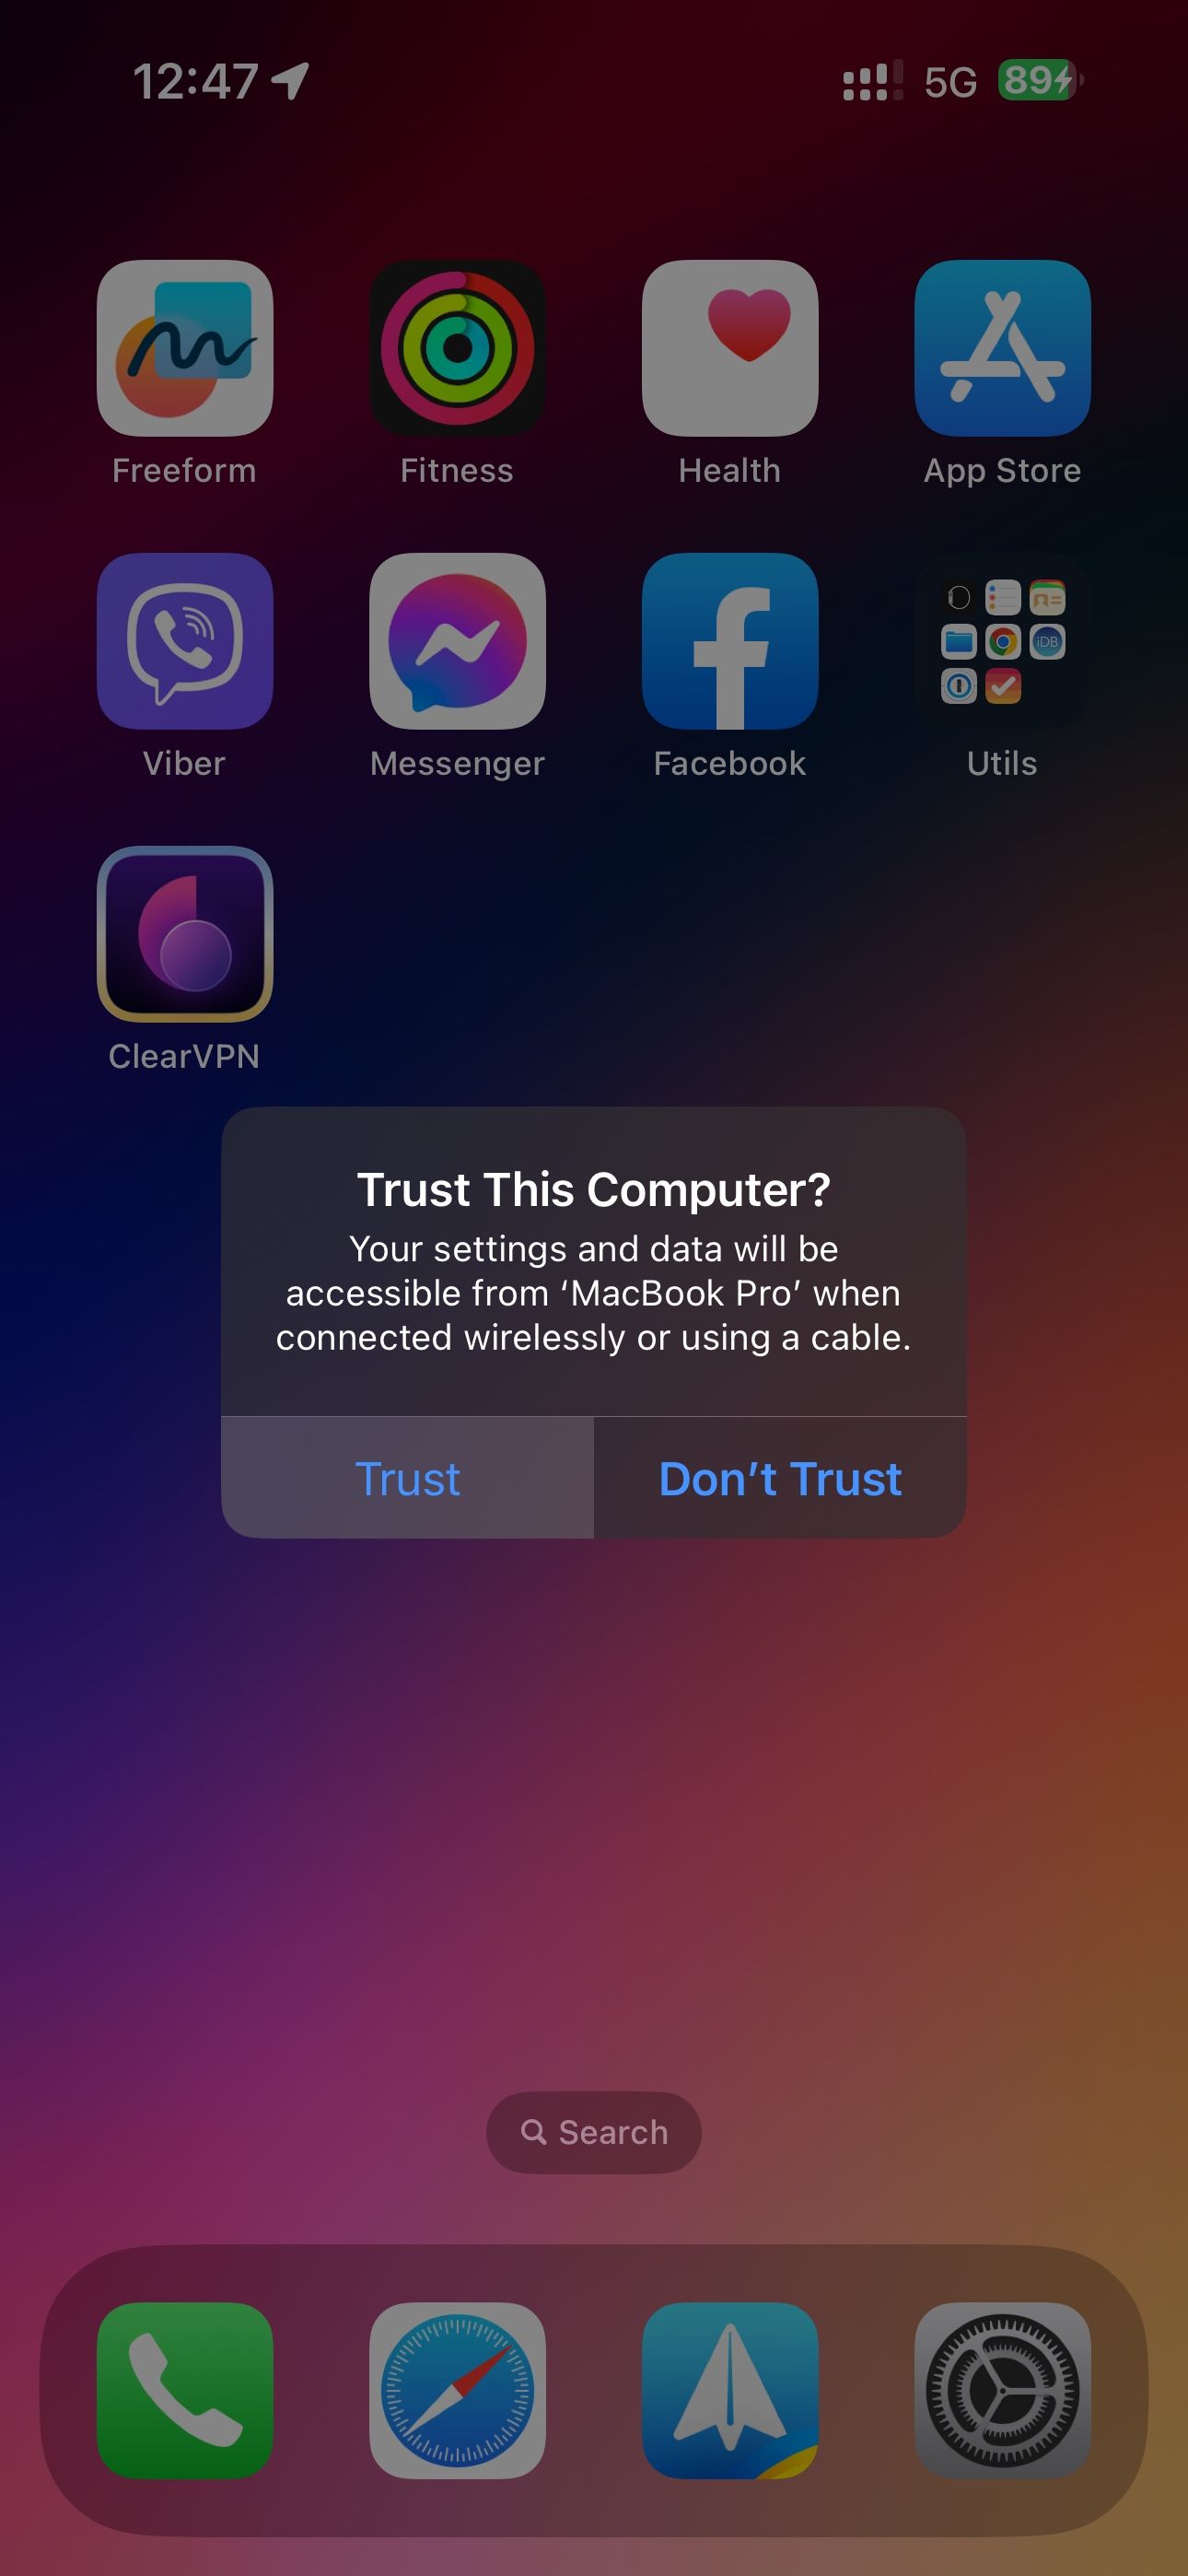 "Trust This Computer" prompt on iPhone